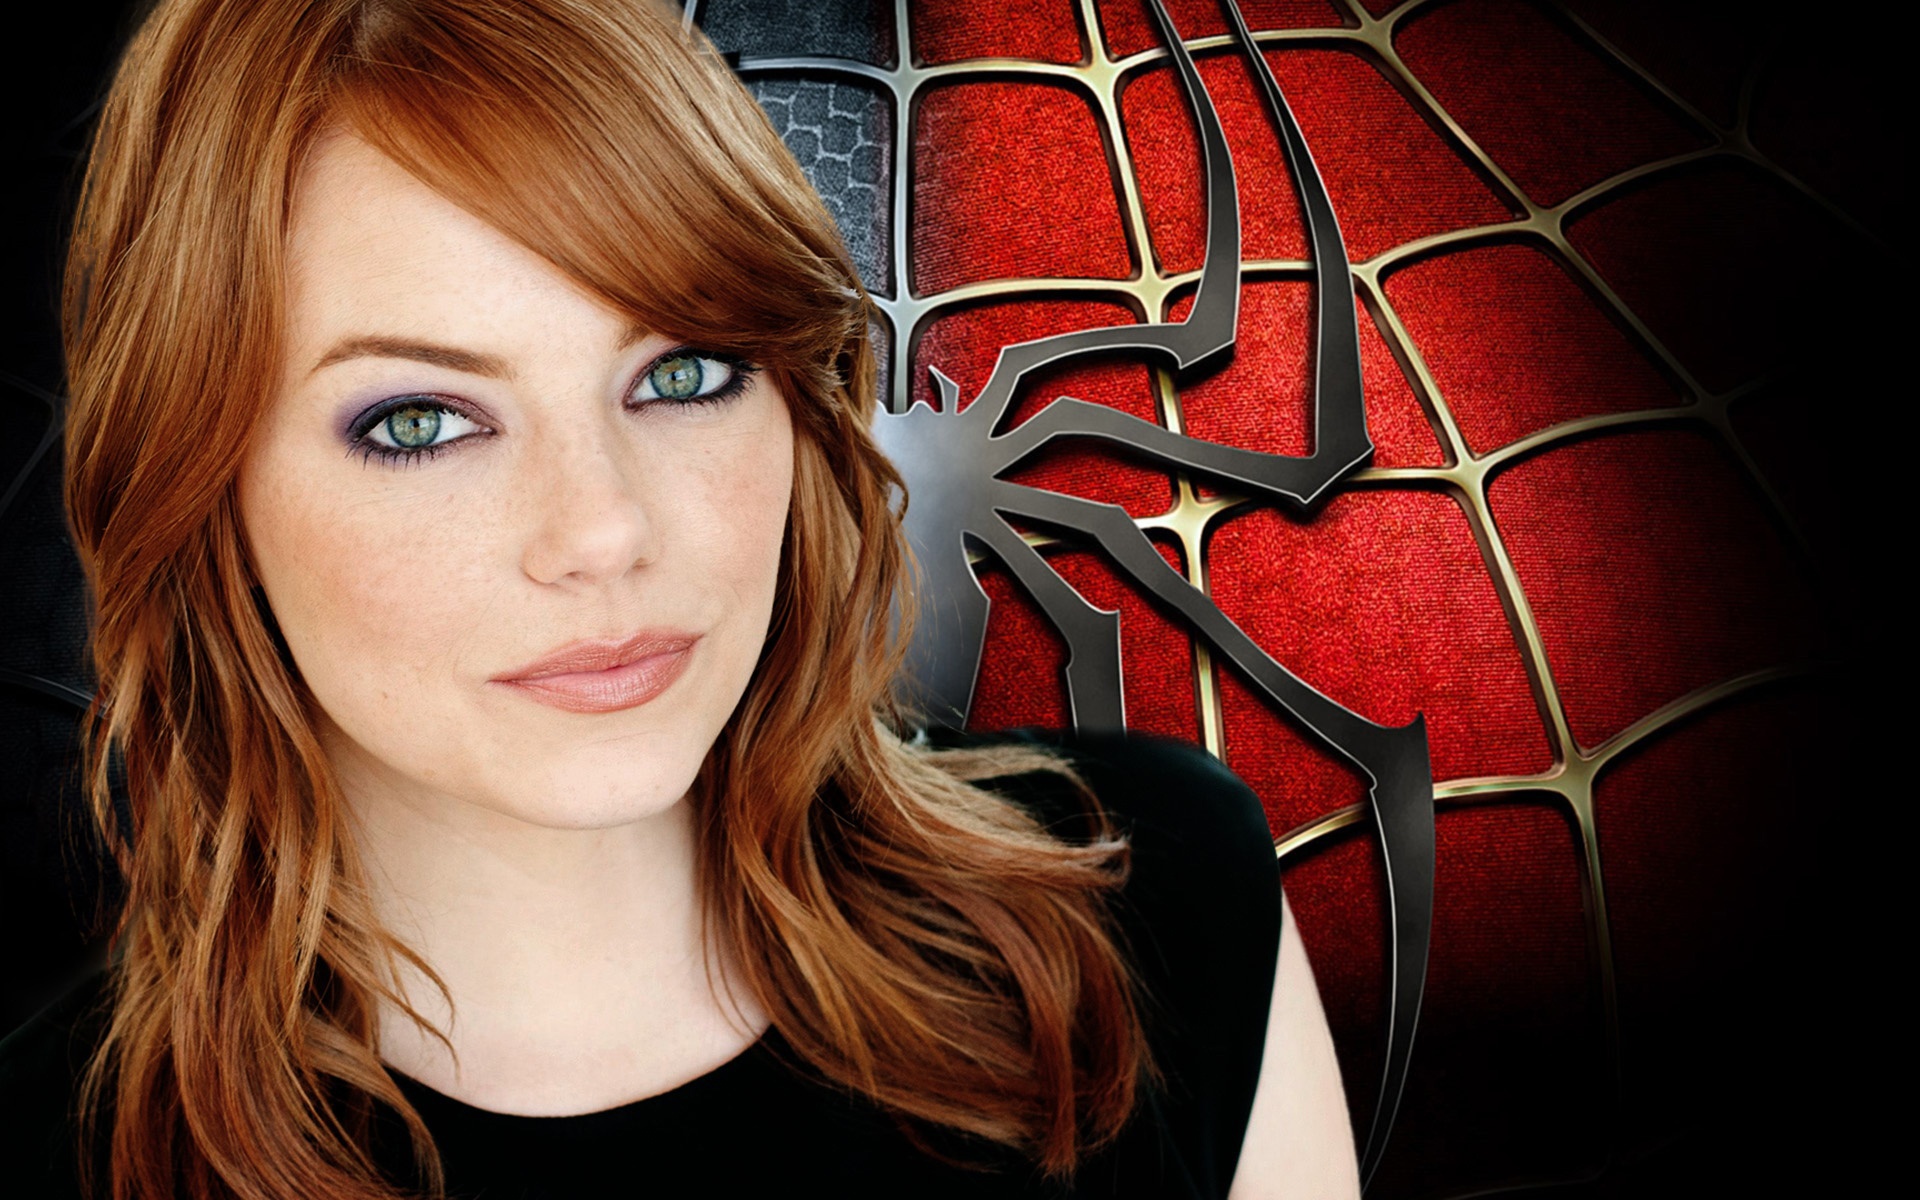 emma stone wallpapers hd a7